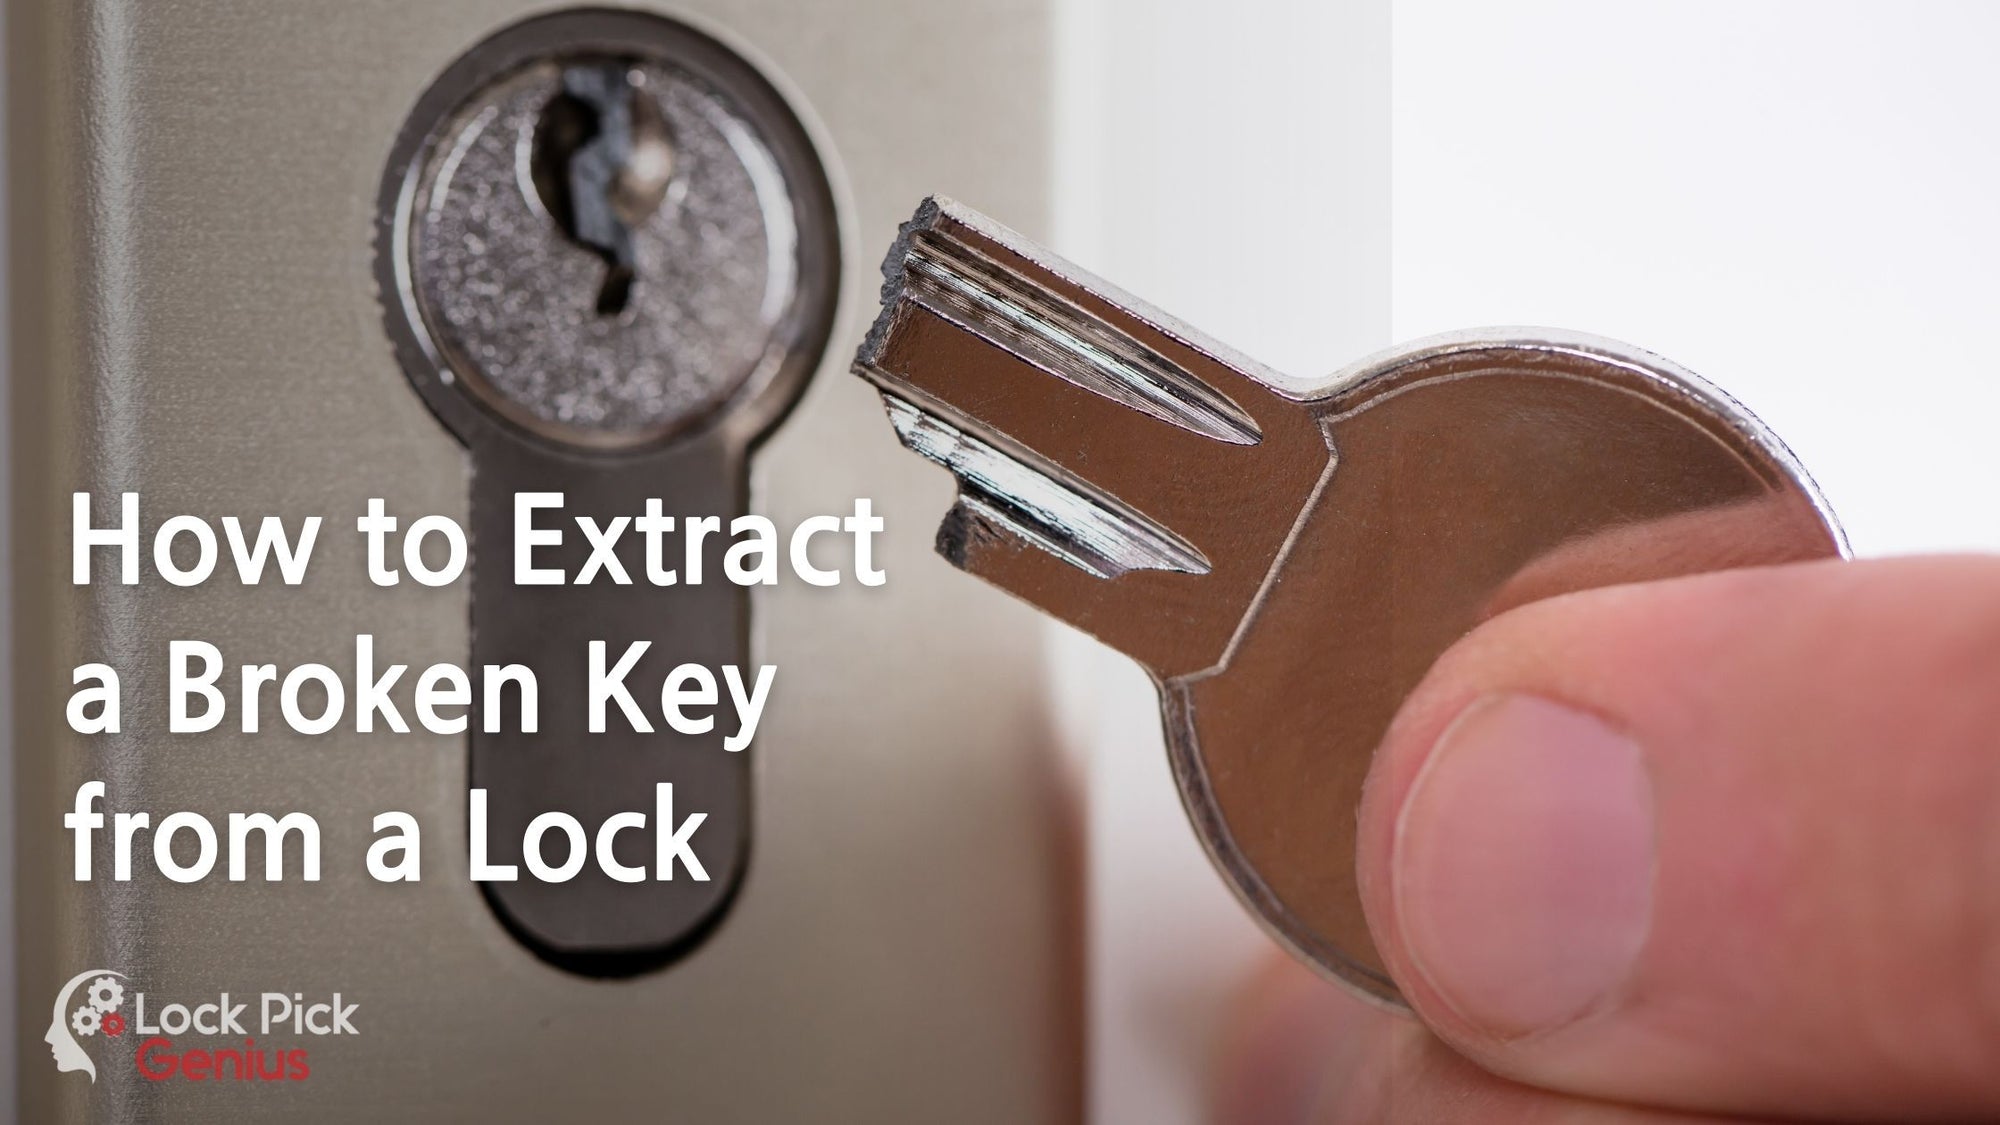 How to extract a broken key from a lock: Using Simple Tools And Common Sense